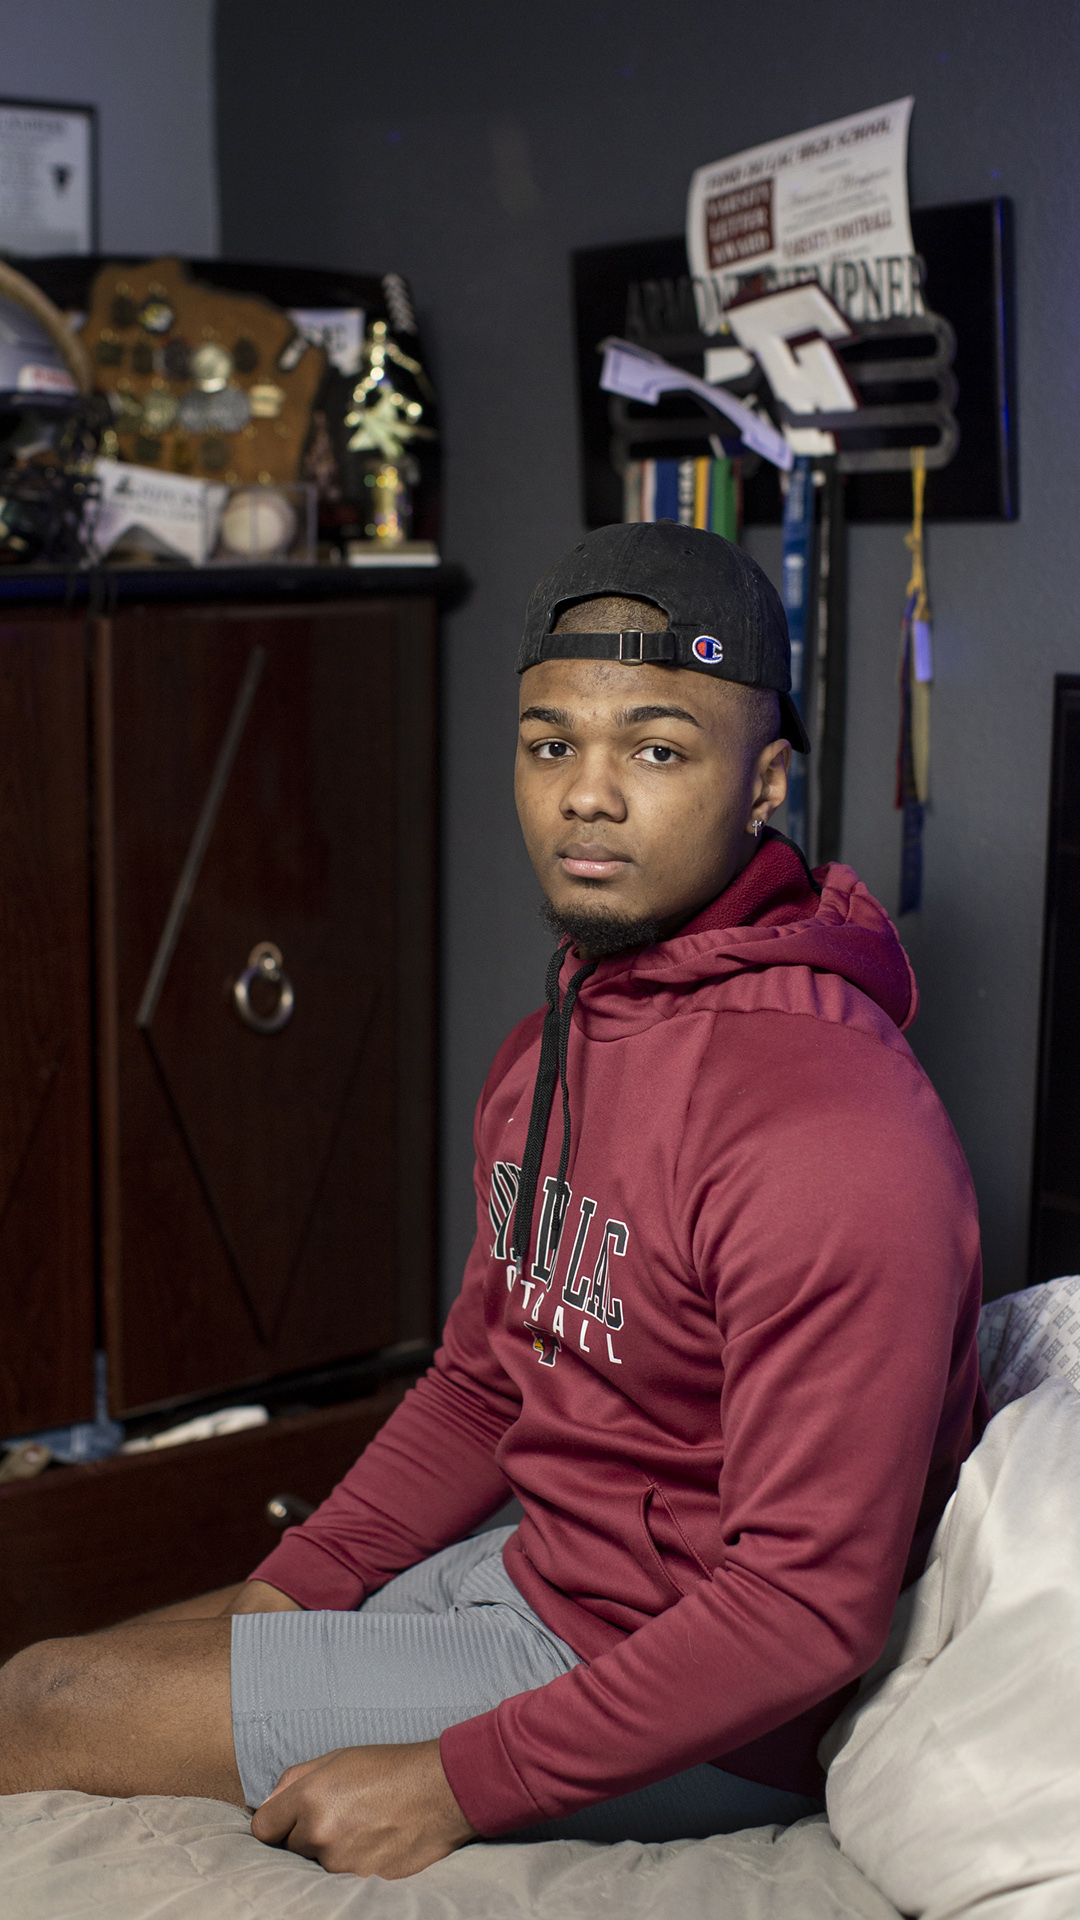 Armond Wempner sits on a bed with an armoire covered with trophies and a wall-mounted rack for medals in the background.